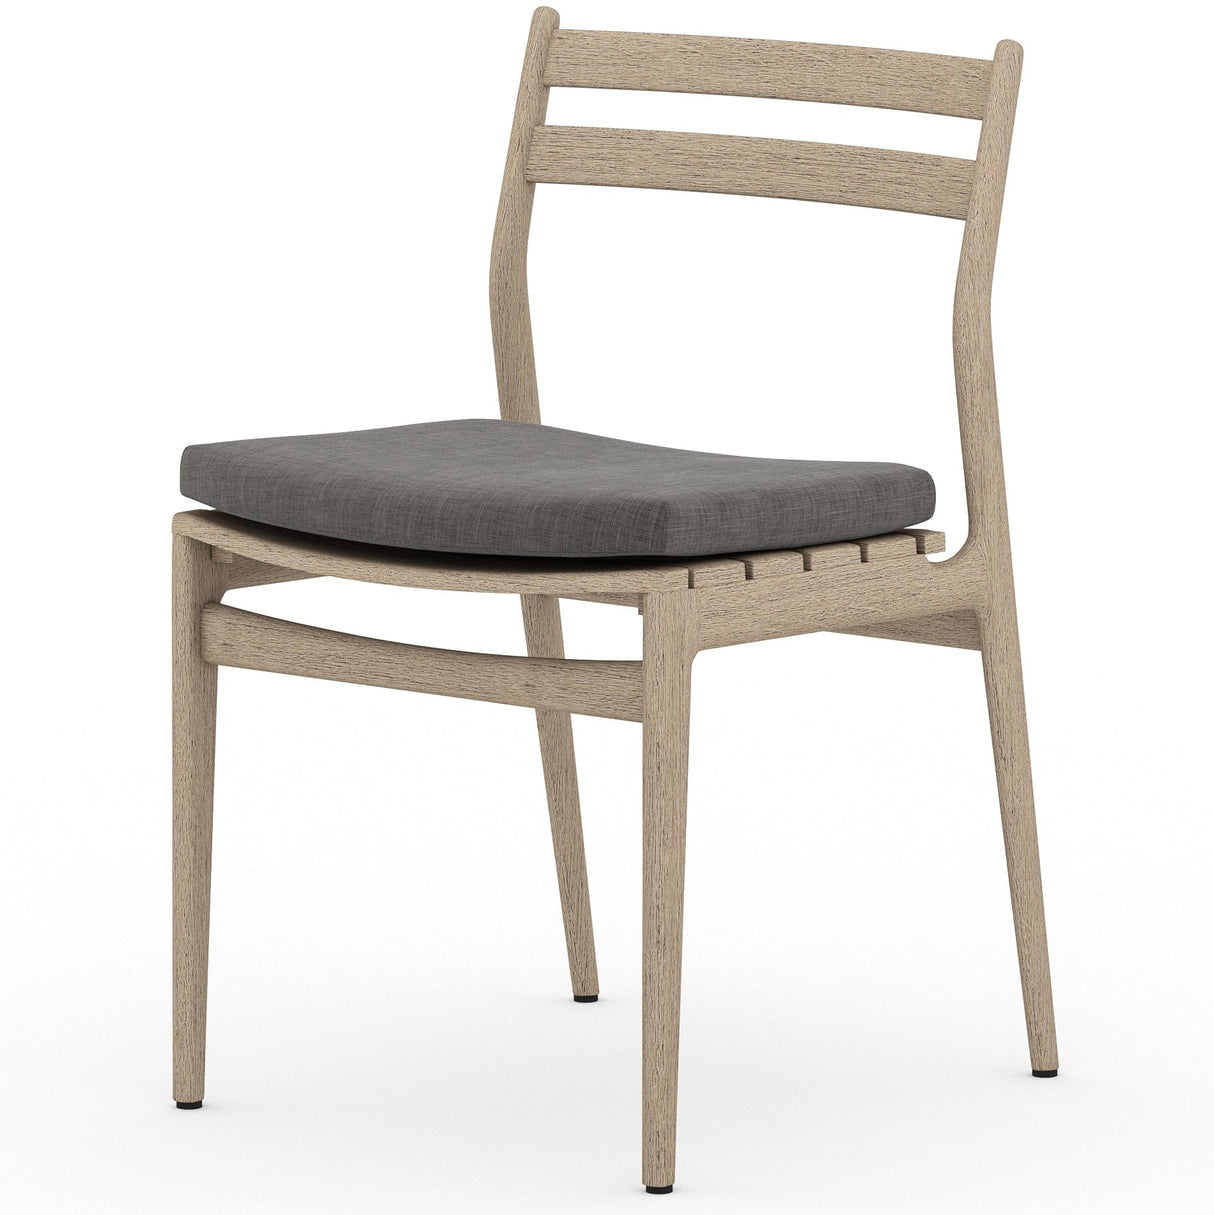 Four Hands Atherton Outdoor Dining Chair Outdoor Furniture four-hands-JSOL-08302K-562 801542492342